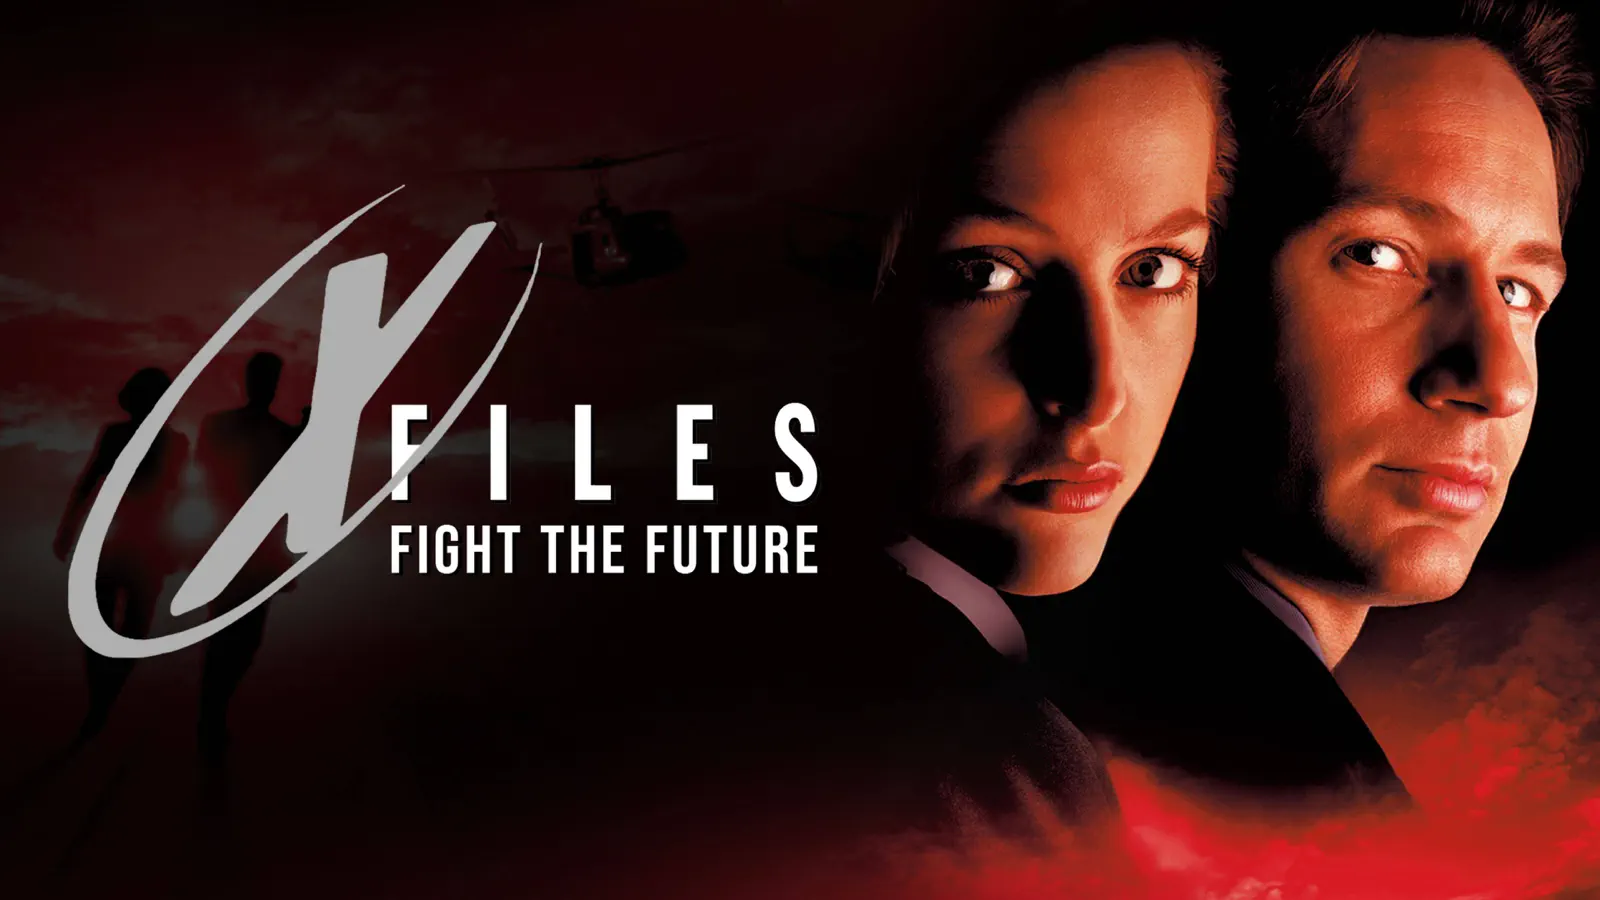 The X-Files; a Tv show of the 90s